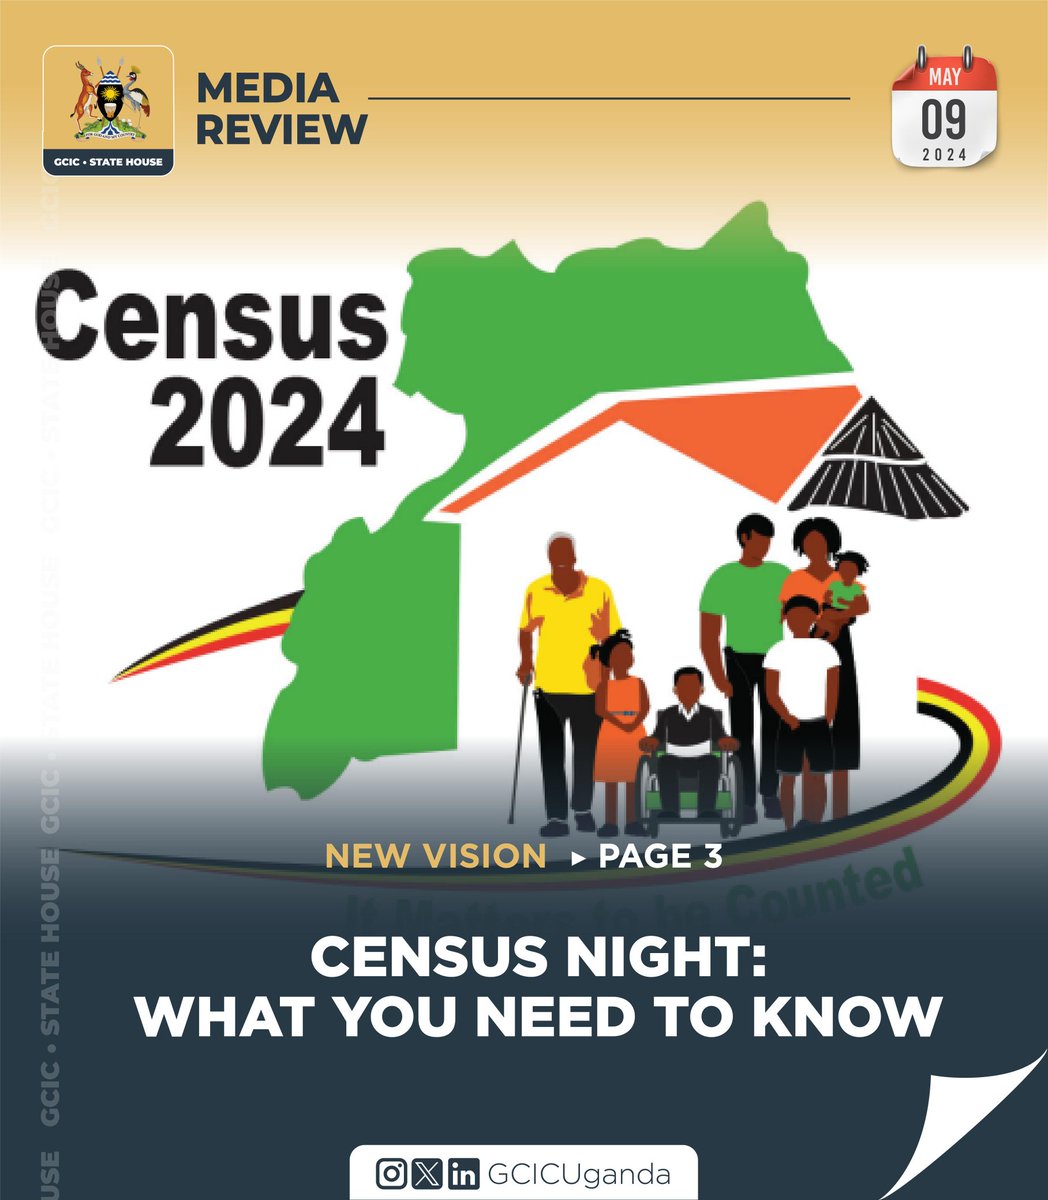 The 2024 Census is here already and today is the census night, go home early, let the night find you there so you get counted. #GCICMediaReview #UgandaCensus2024